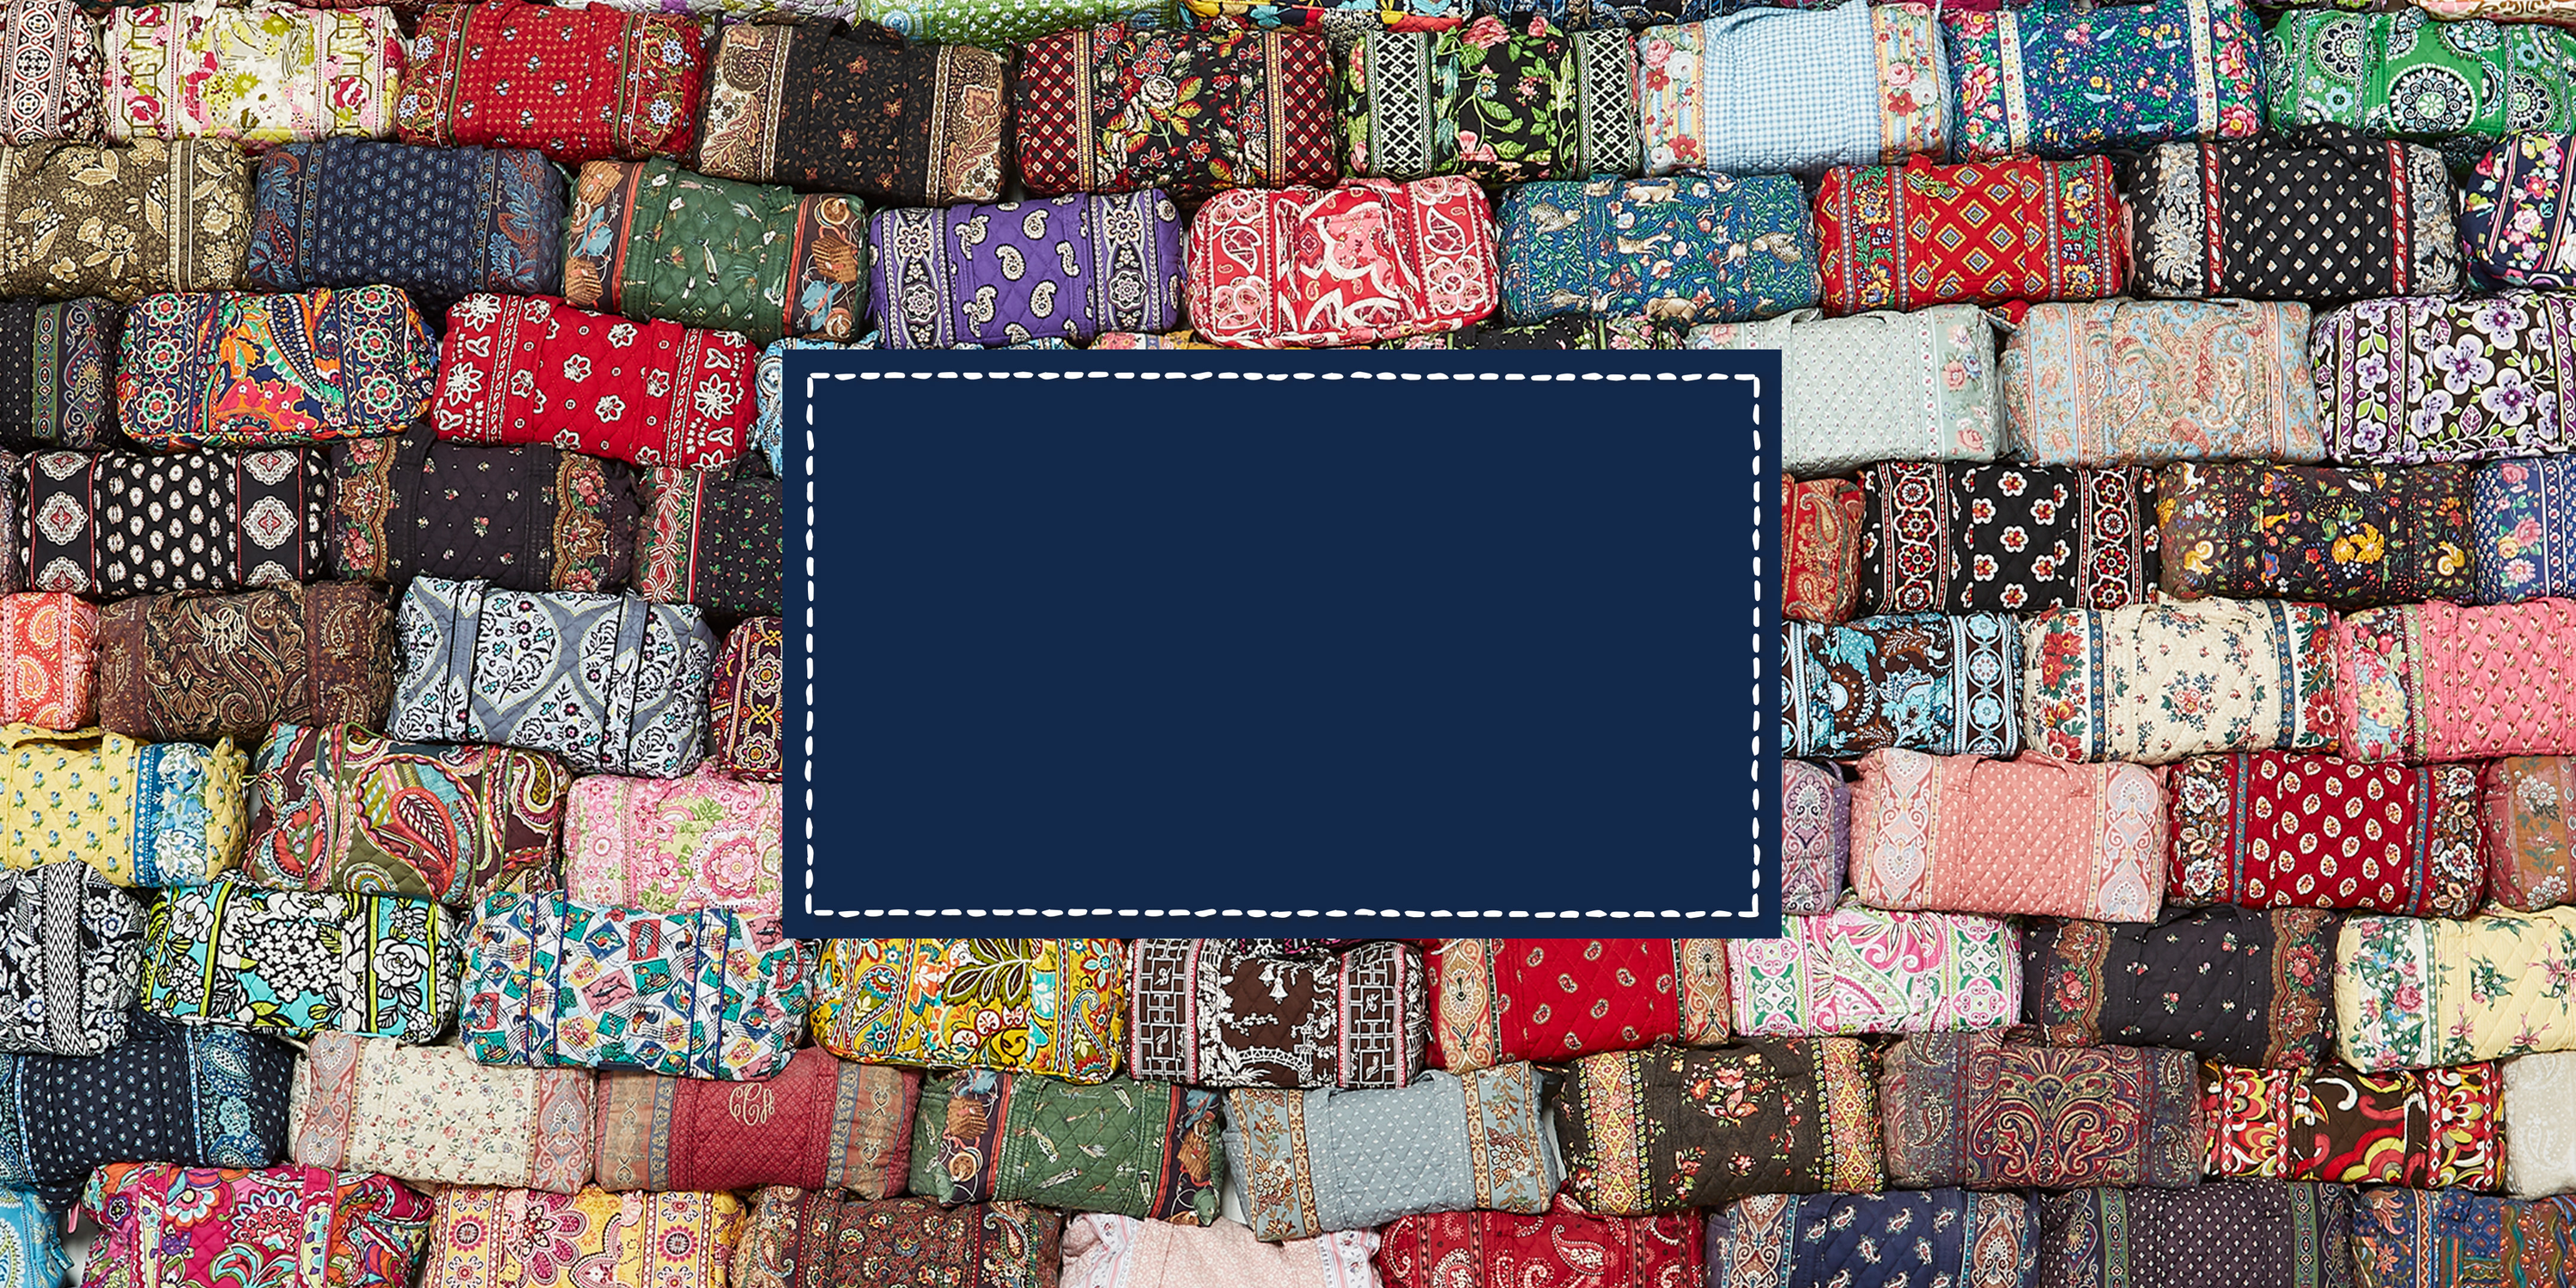 A patchwork of multicolored patterned Vera Bradley duffle bags